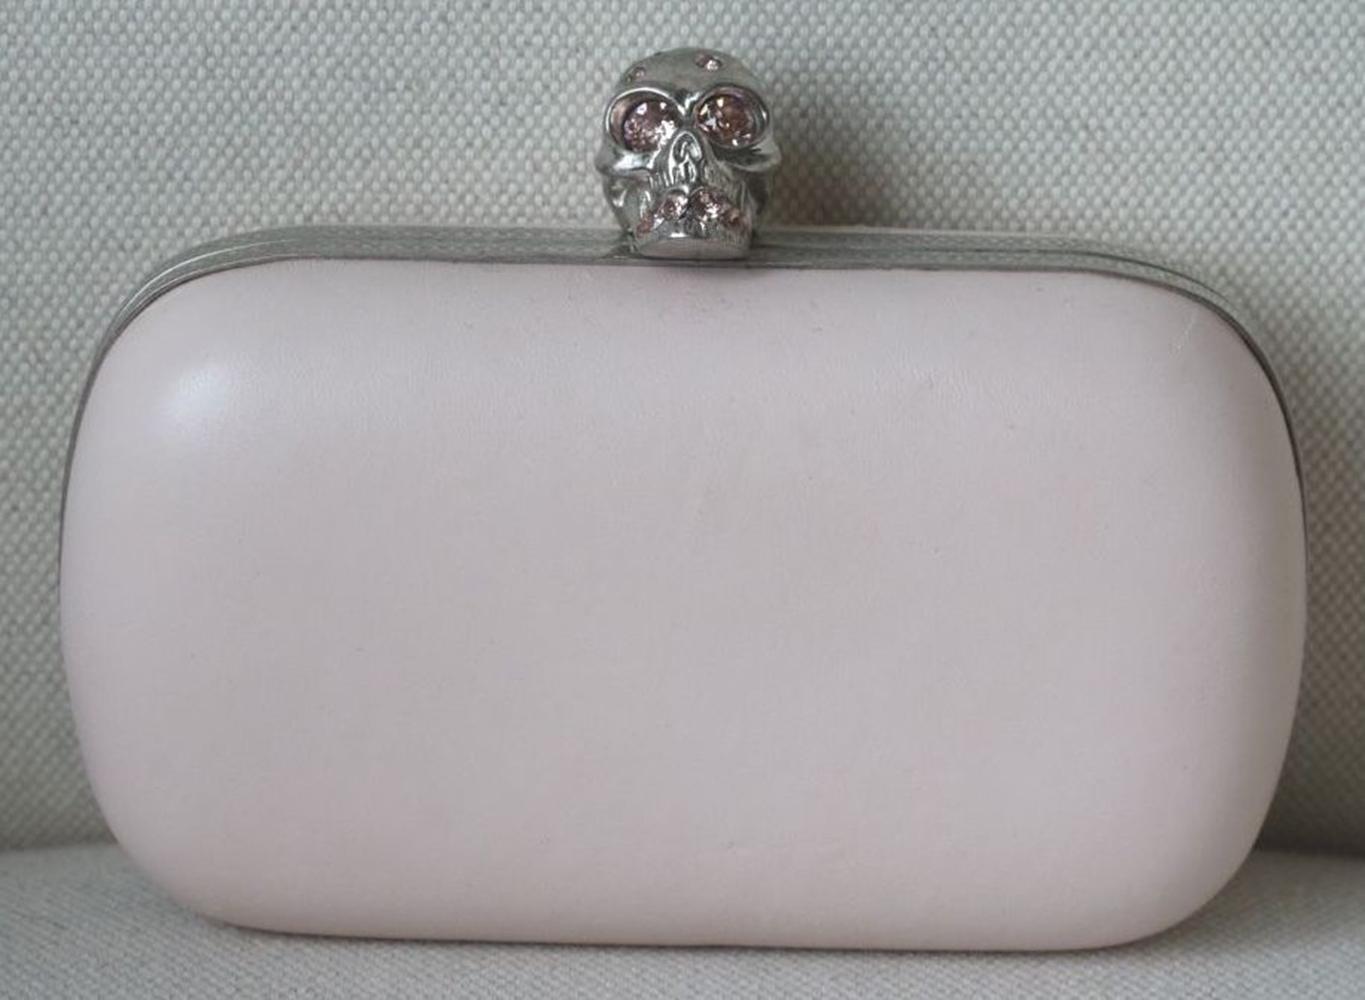 With a Swarovski crystal embellished skull clasp. Alexander McQueen's box clutch embodies the label's punk-luxe aesthetic. 

Dimensions: Approx. 14 x 9 x 5 cm 

Condition: As new condition, no sign of wear. 

*Please note, this bag does not come